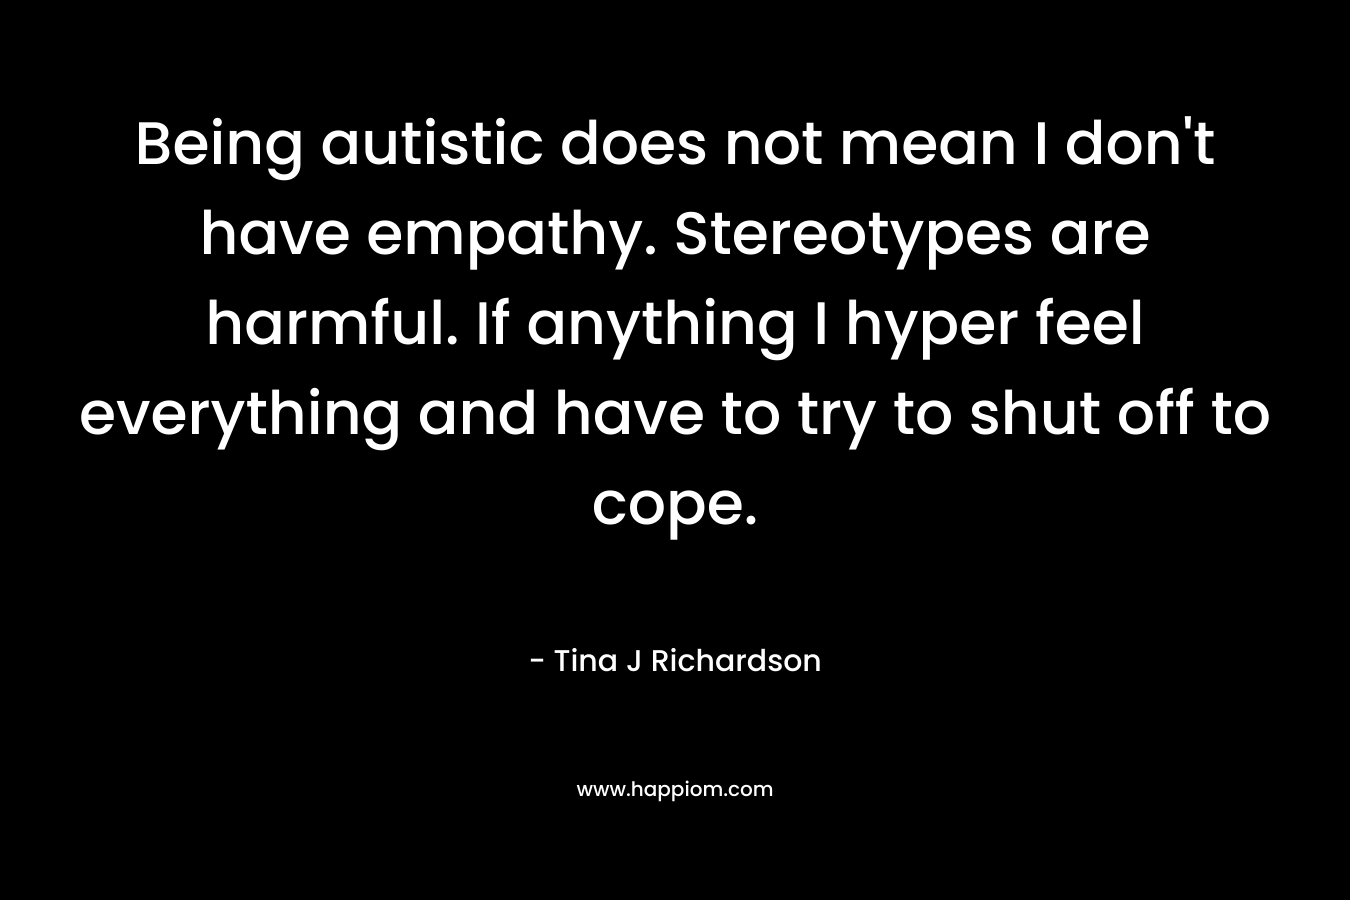 Being autistic does not mean I don't have empathy. Stereotypes are harmful. If anything I hyper feel everything and have to try to shut off to cope.